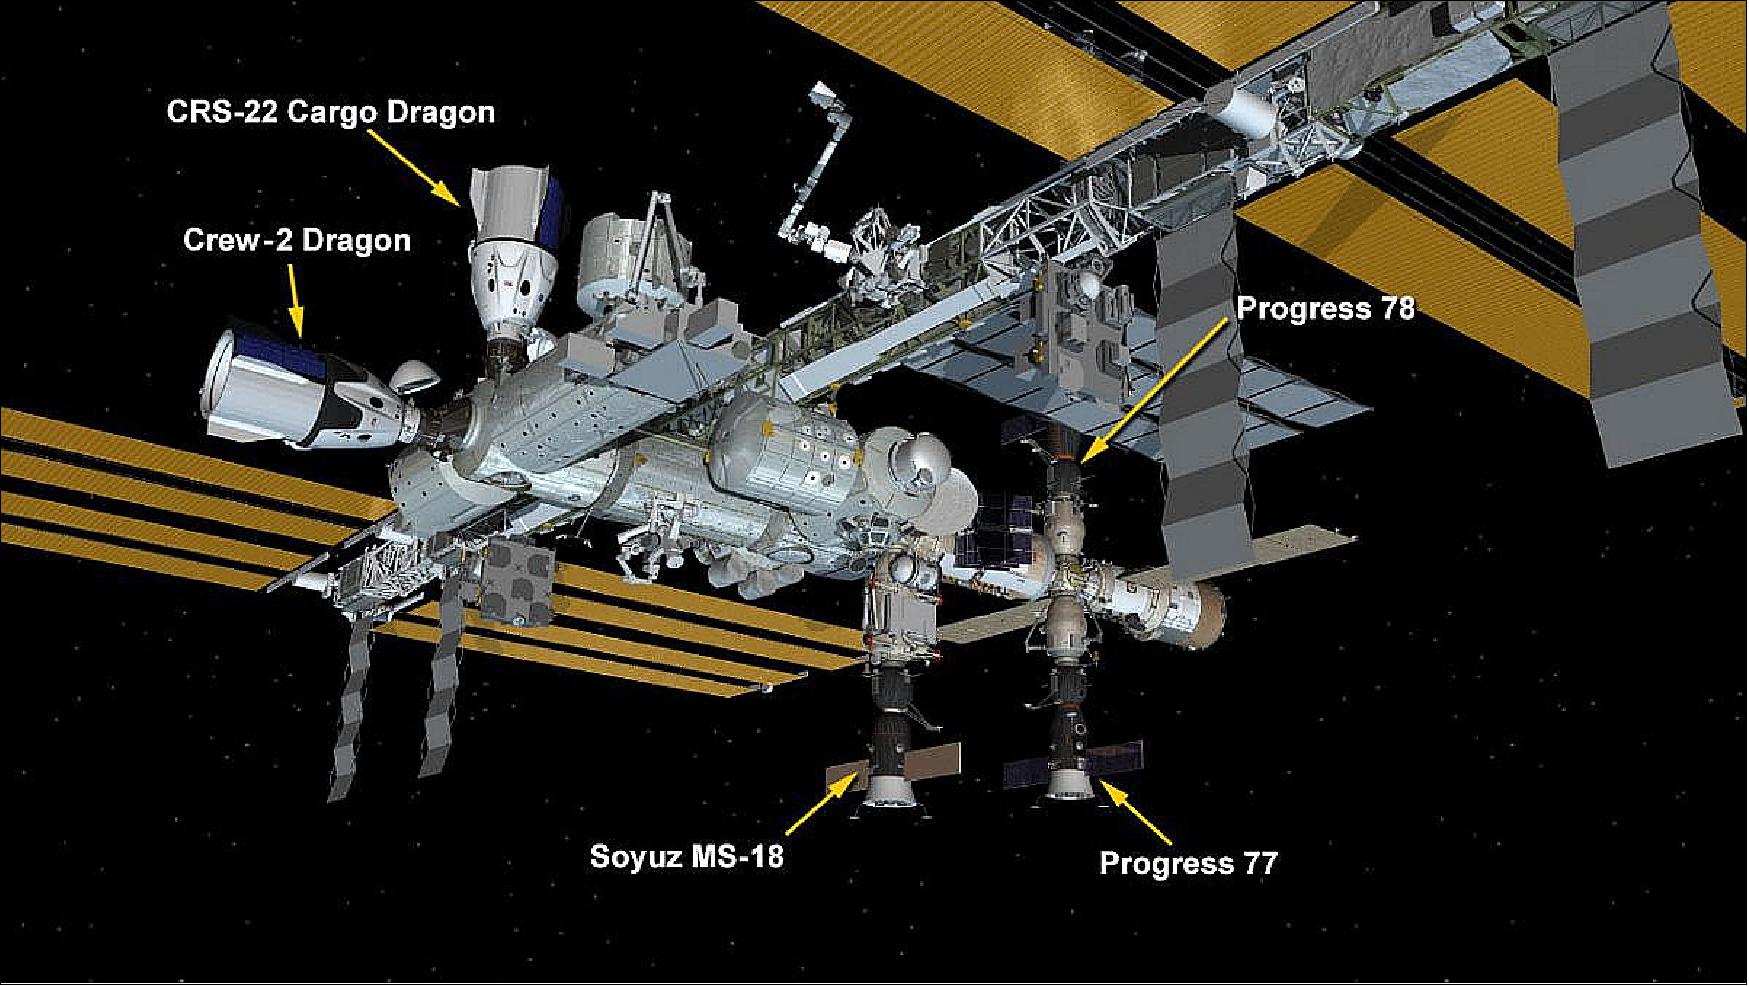 Figure 61: ISS configuration on 1 July 2021: Five spaceships are parked at the space station including the SpaceX Crew Dragon and Cargo Dragon spaceships and Russia's Soyuz MS-18 crew ship and ISS Progress 77 and 78 resupply ships (image credit: NASA TV)